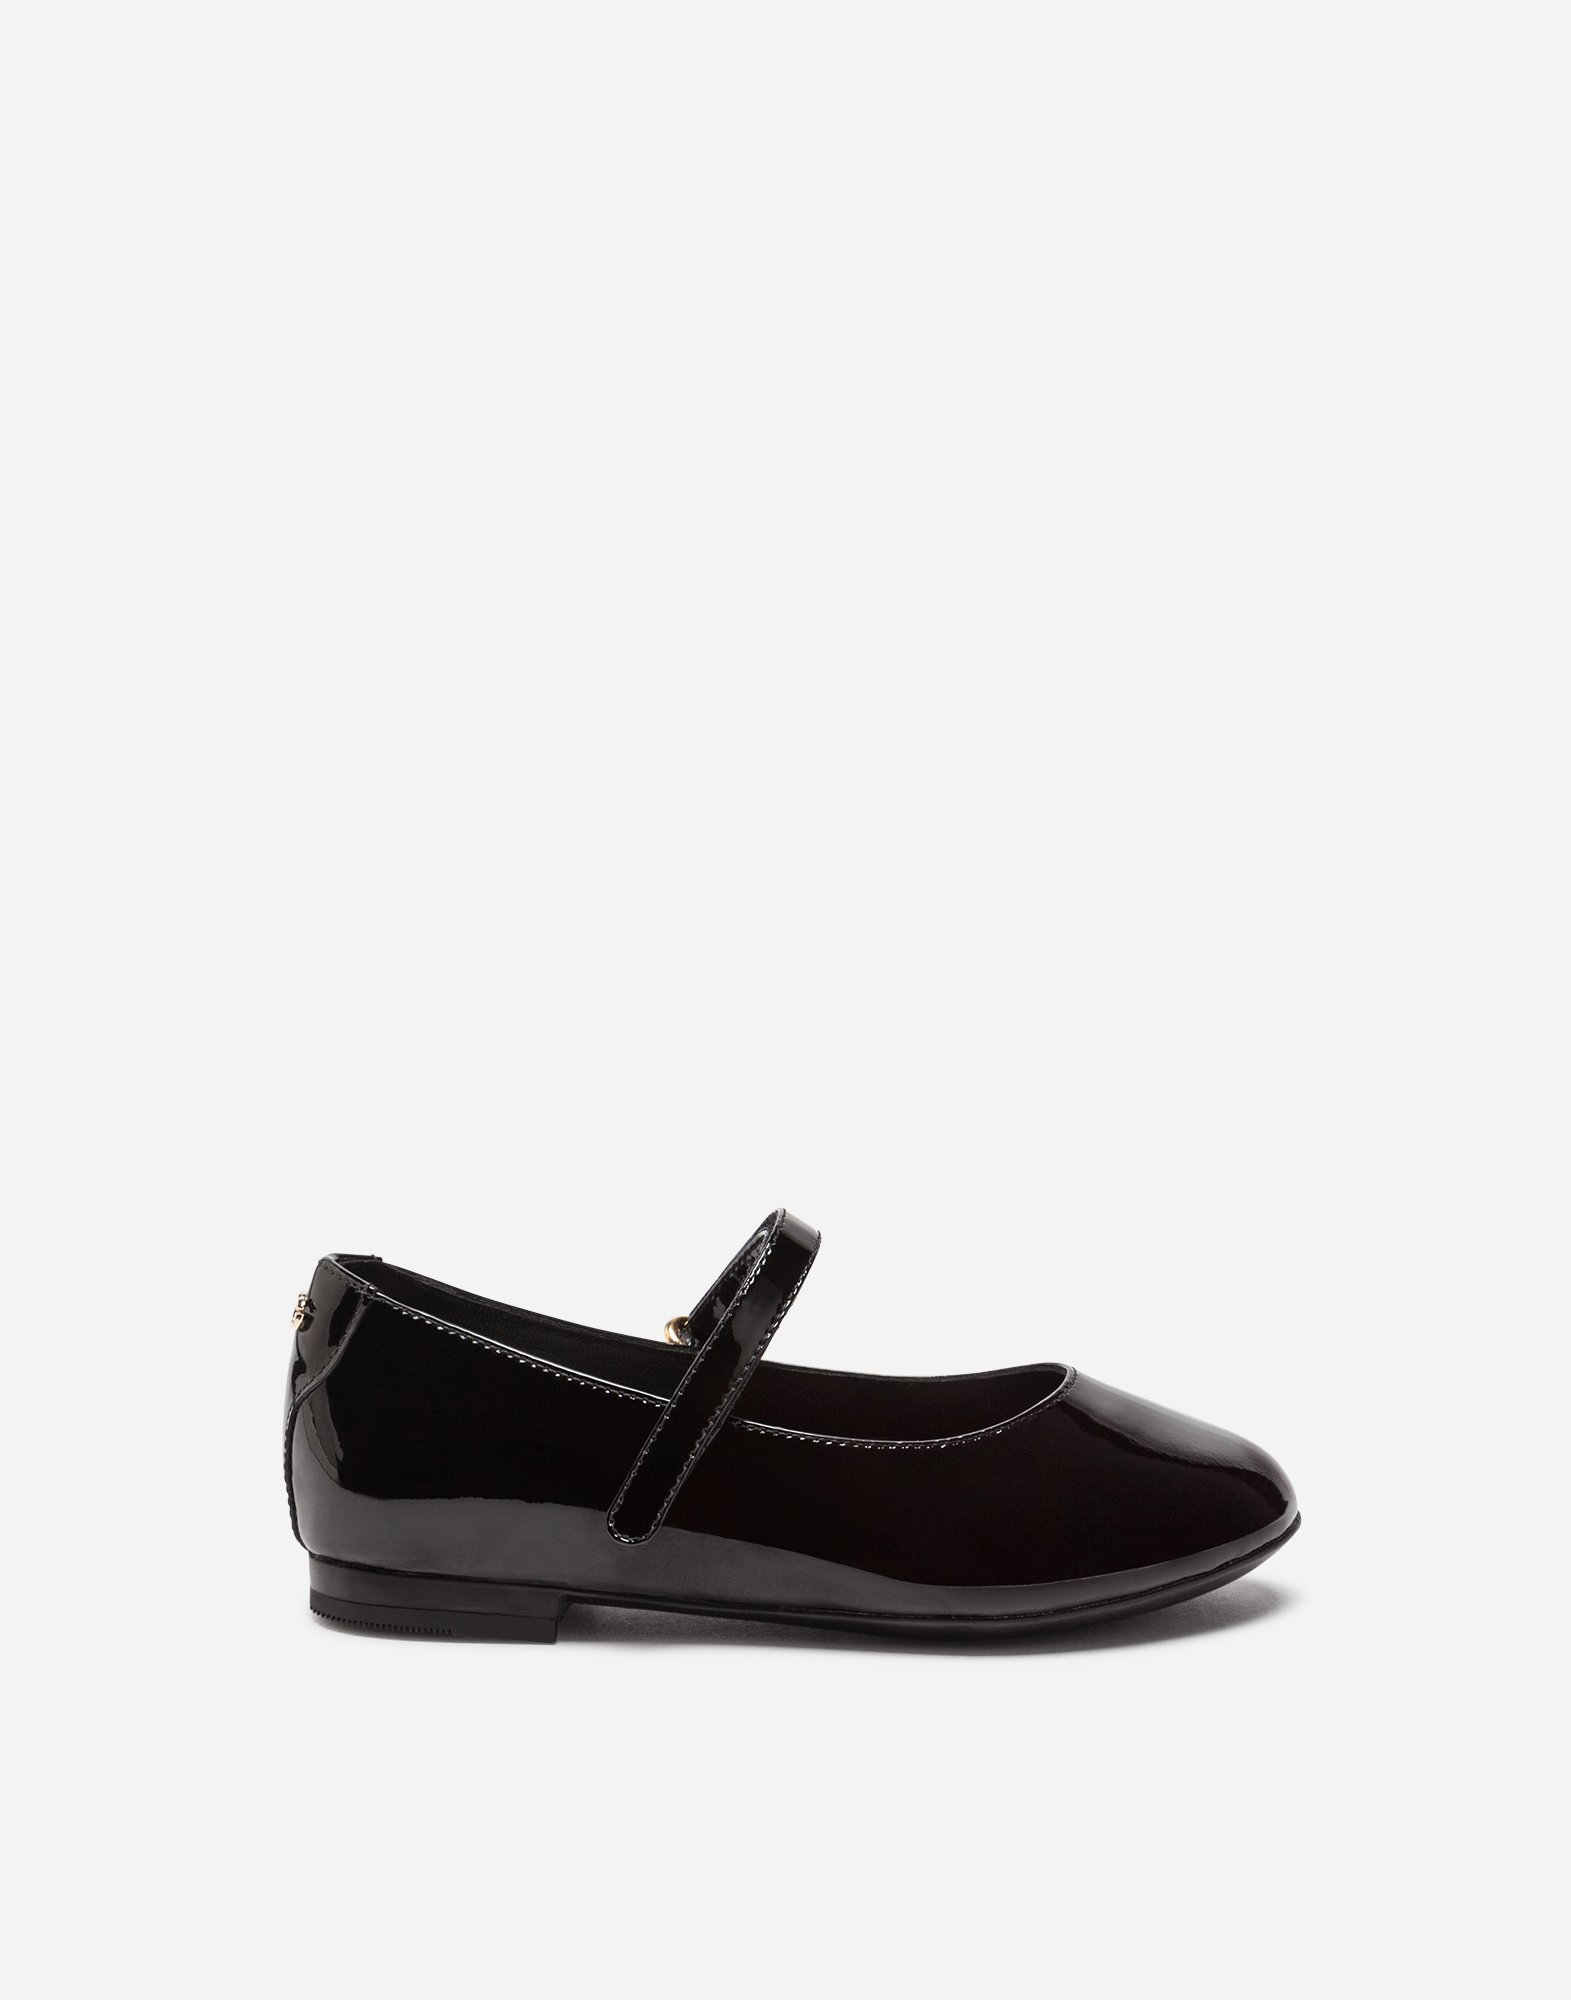 Patent leather mary jane ballet flats in Black